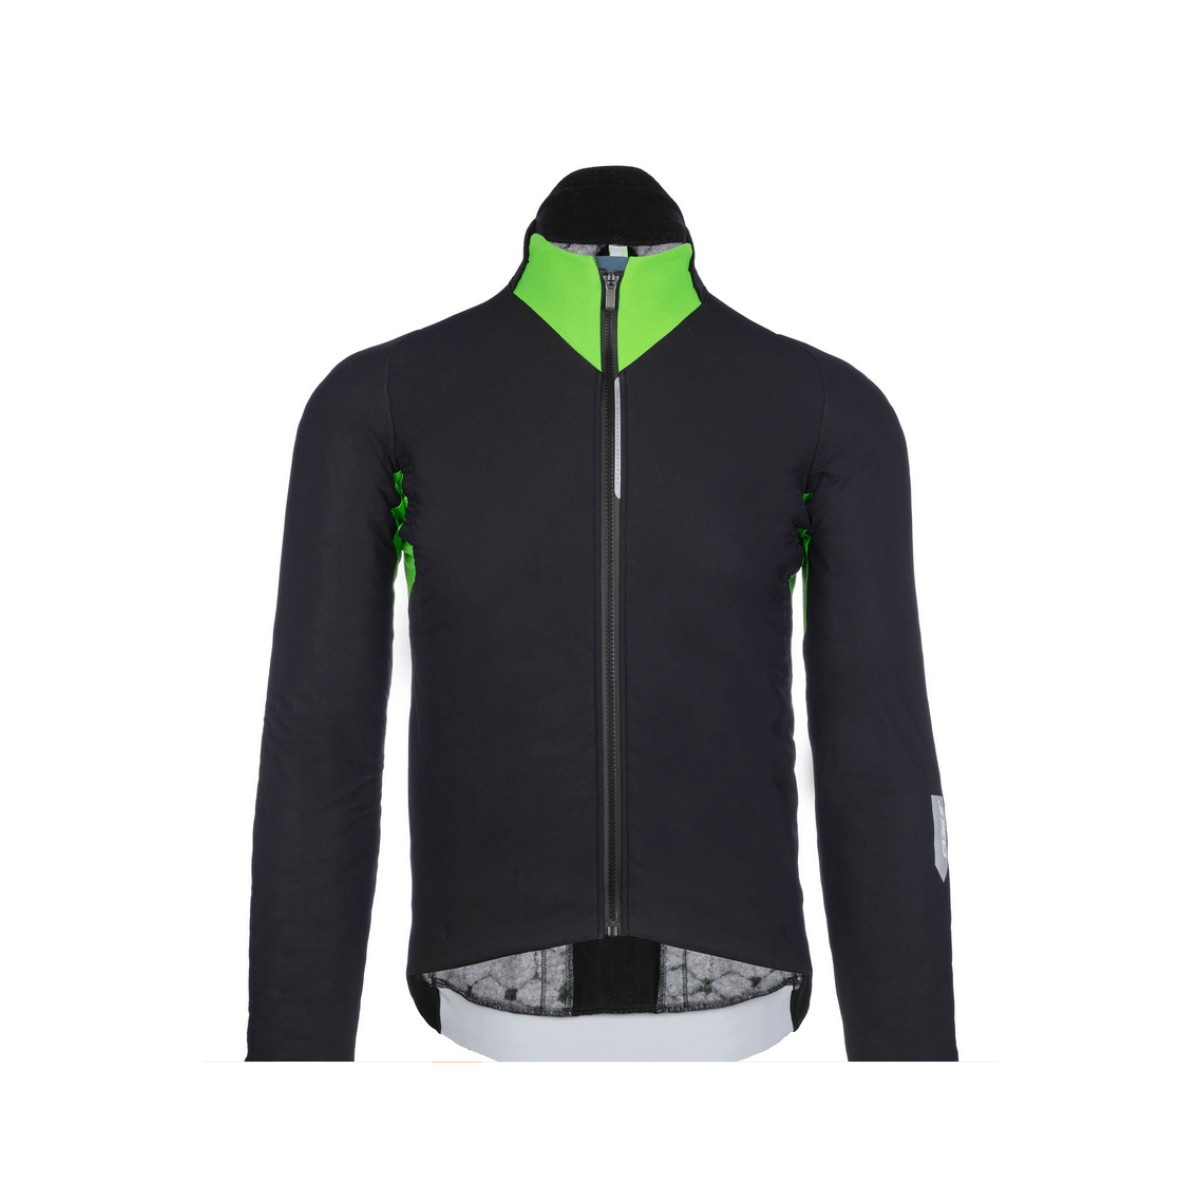 Q36.5 Interval Thermal Jacket Black Green, Size S